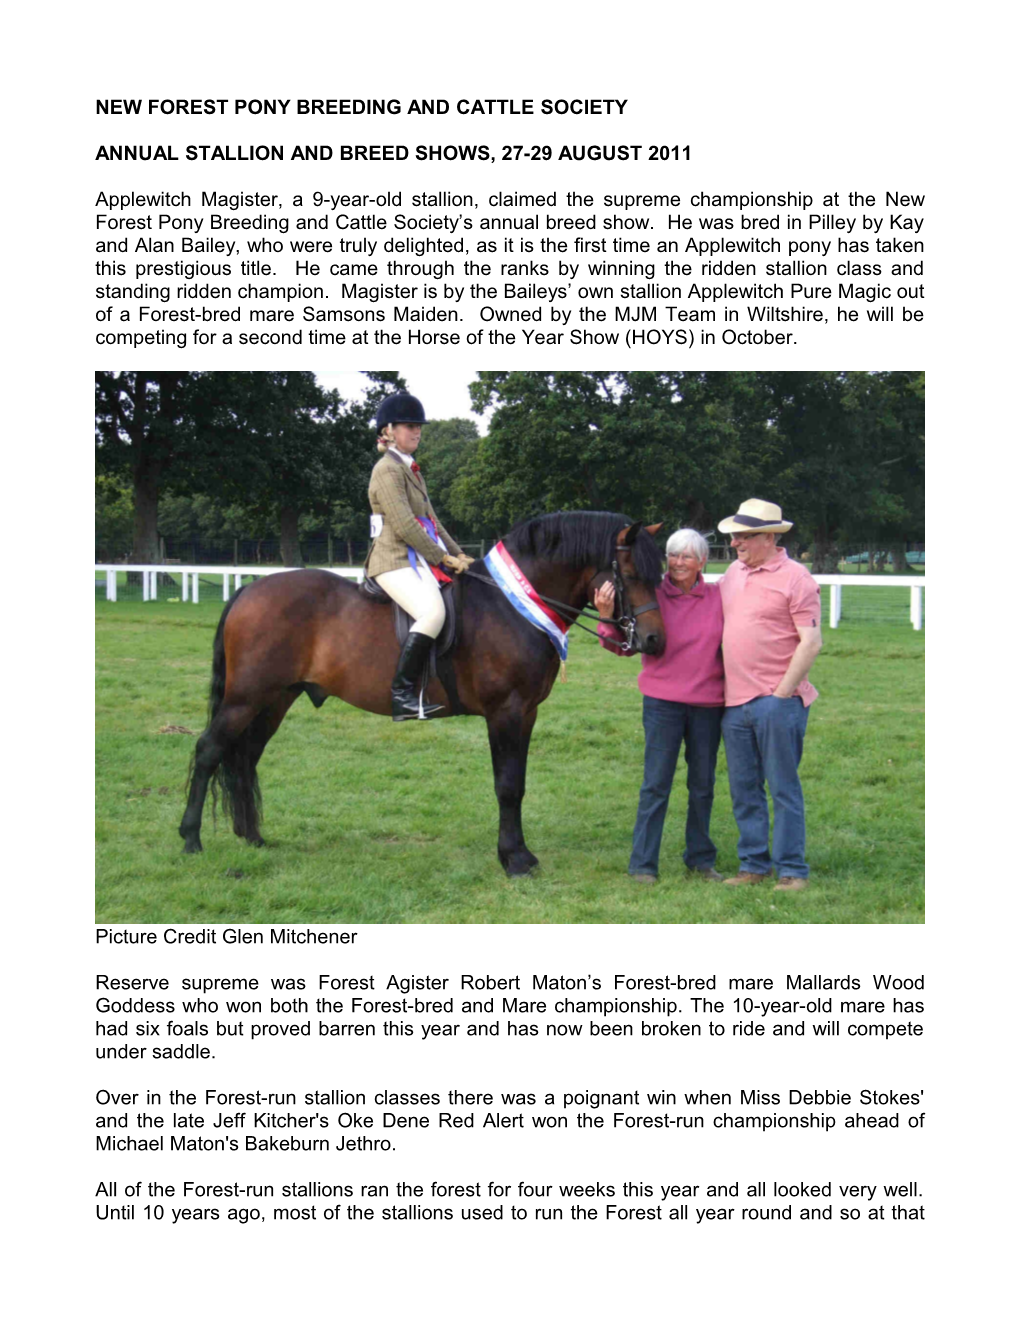 Applewitch Magister a 9Yo Stallion Claimed the Supreme of the Annual Breed Show Under The